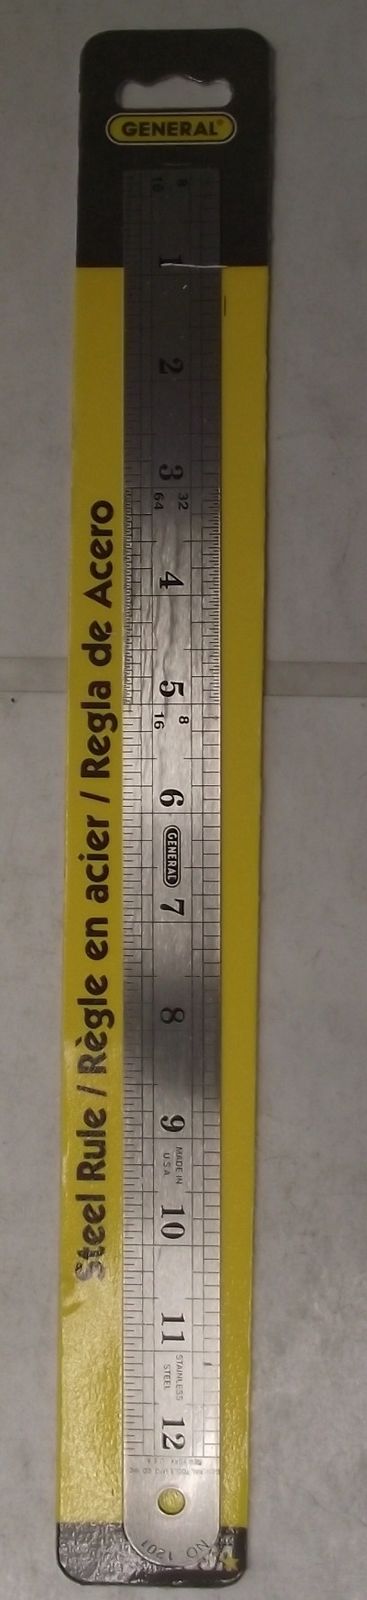 Precision Ruler, Flexible Stainless Steel, 12-In.